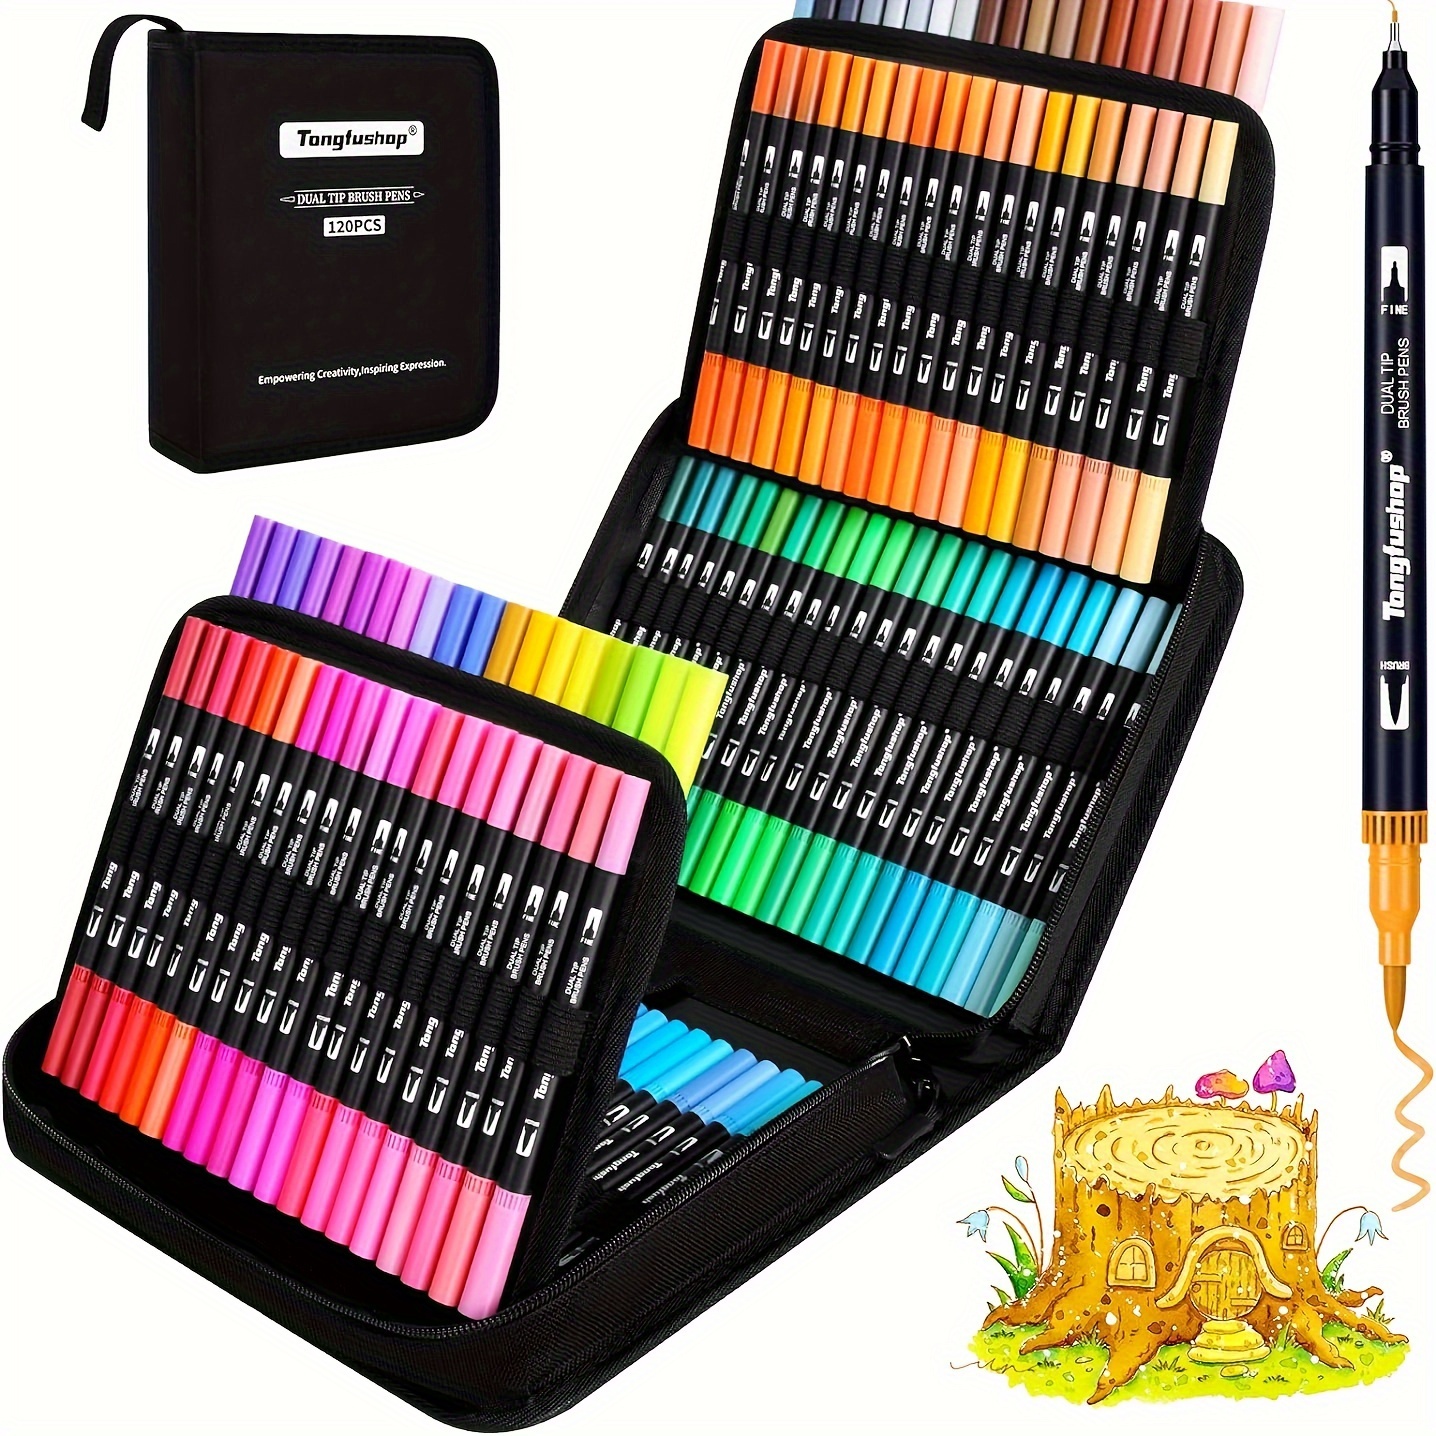 

Tongfushop 60/72/100/120 Colors Dual Tip Brush Markers, Brush And Fineliner Coloring Brush Pens Set, Art Pen For Coloring Books, Christmas Cards Drawing, Lettering, Calligraphy, Journaling, Doodling